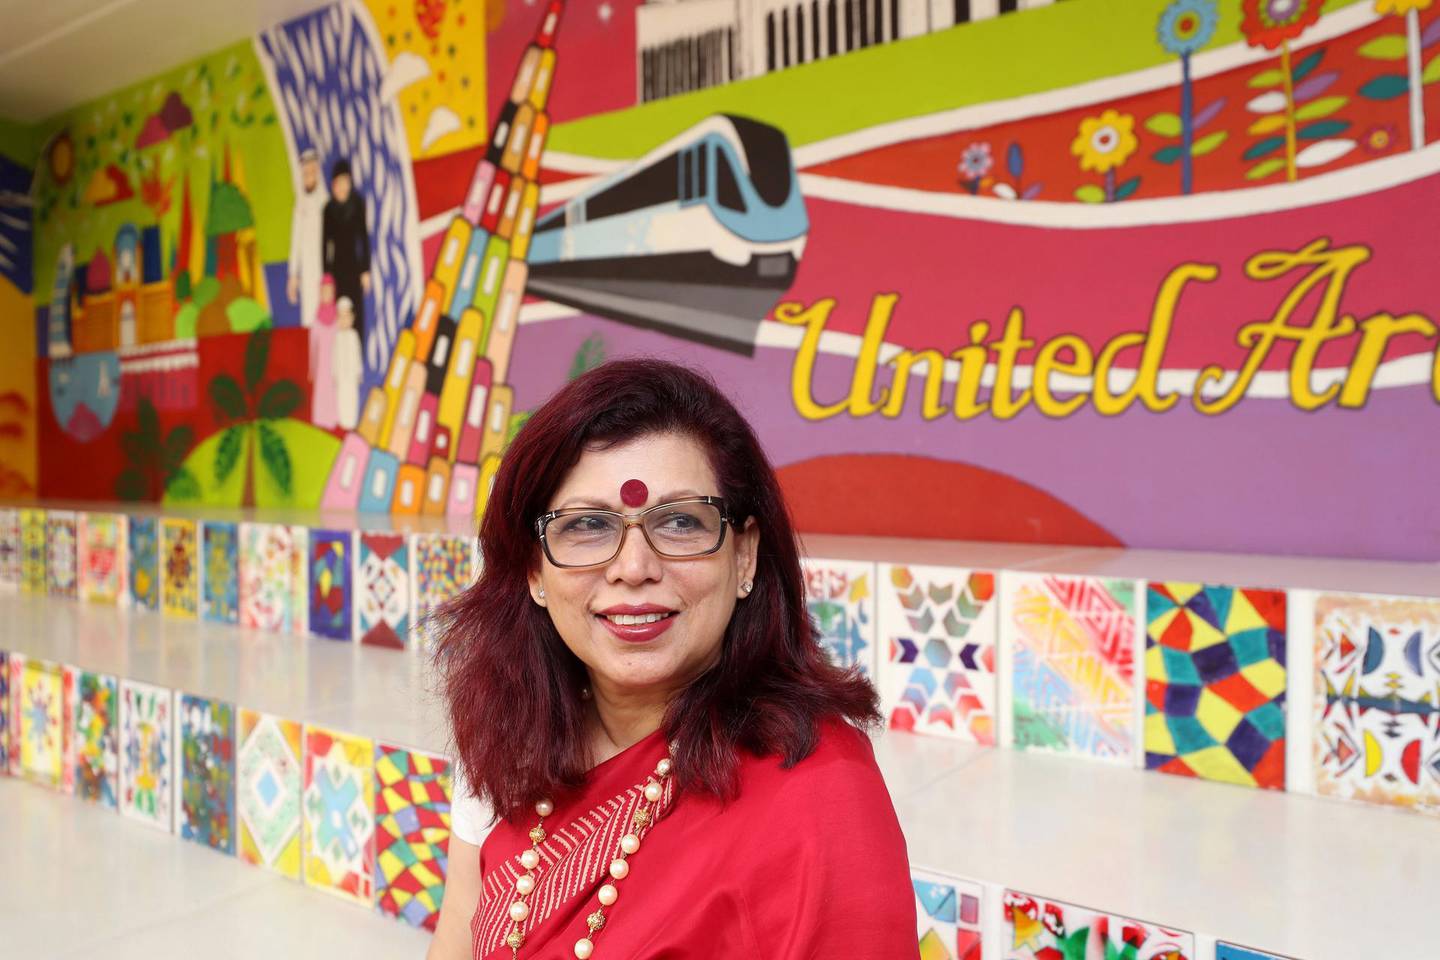 Dubai, United Arab Emirates - February 14, 2019: Rashmi Nandkeolyar, principal at Delhi Private School. Rahhal programme is in its second phase and heads of schools are discussing the challenges it faces. Thursday the 14th of February 2019 at The Gardens, Jebel Ali, Dubai. Chris Whiteoak / The National